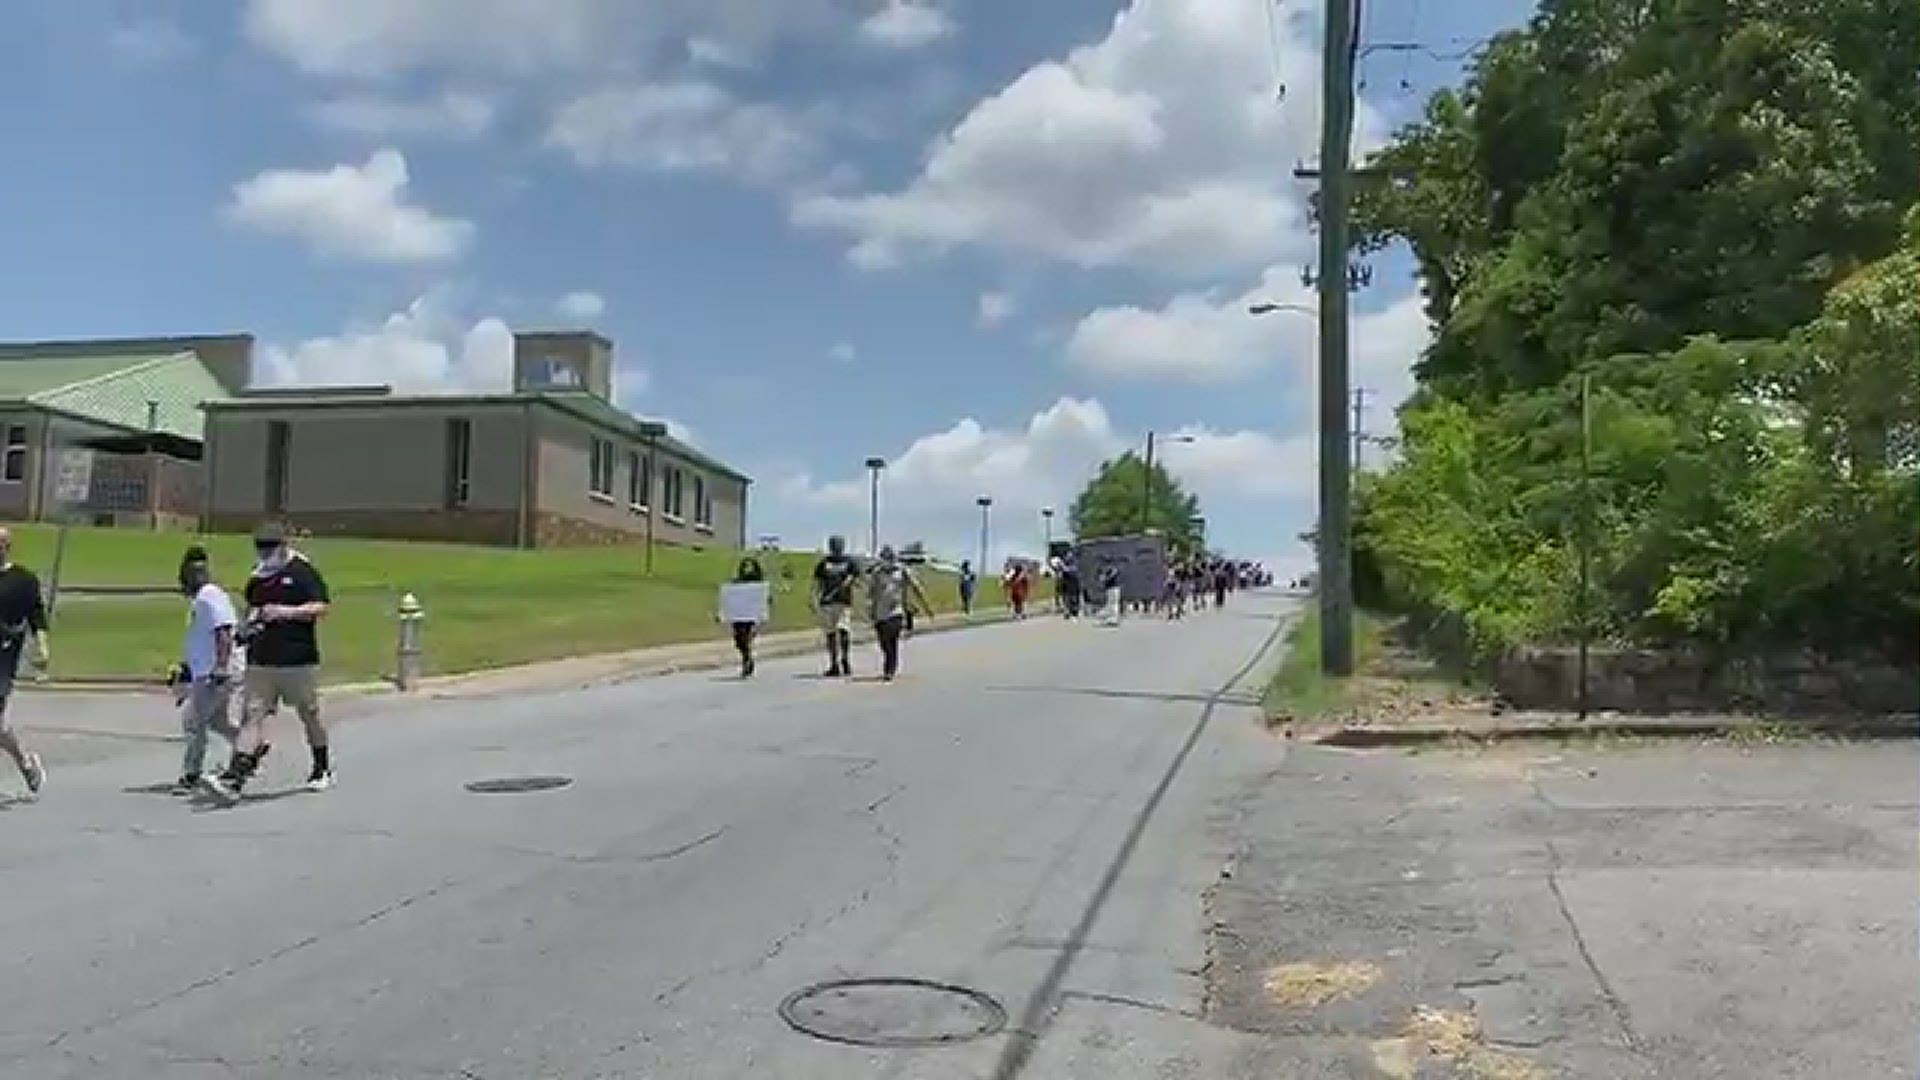 The march makes its way down the 7th Street Hill towards the George Floyd mural in Little Rock.